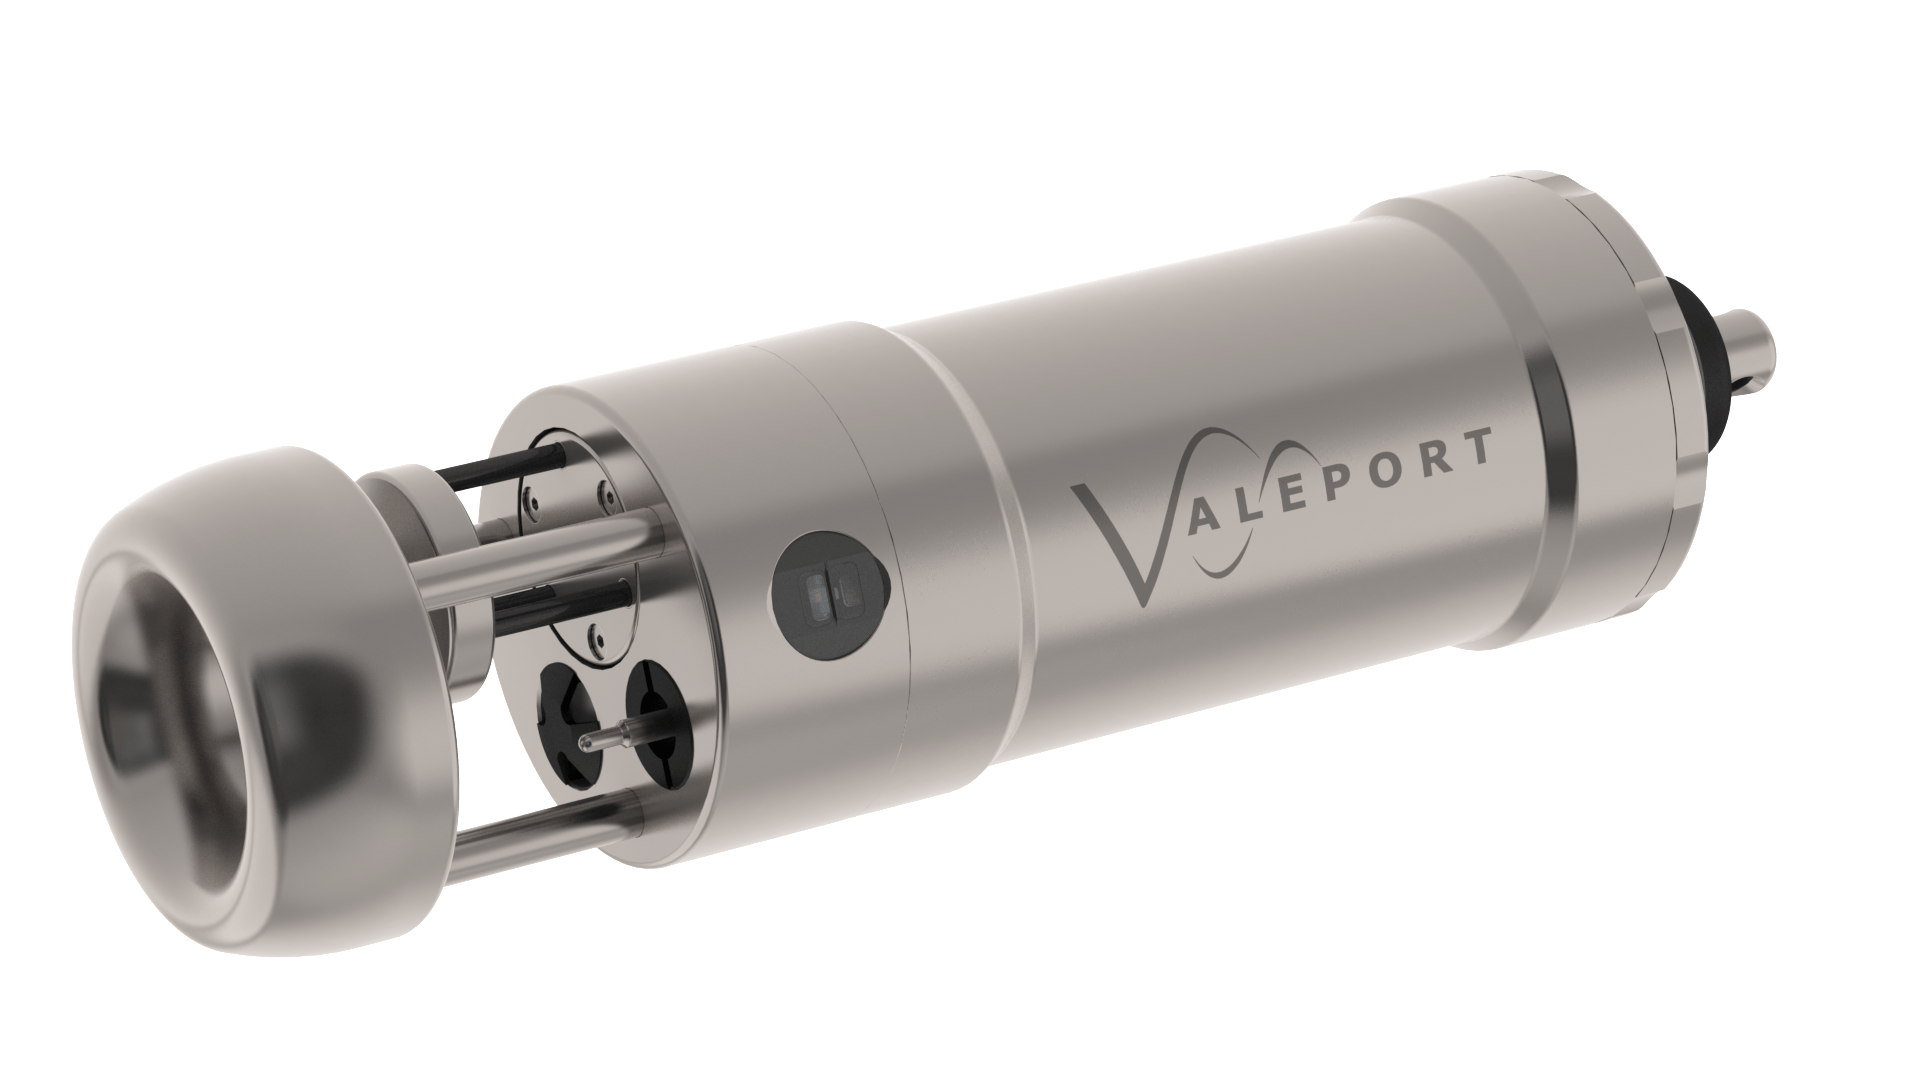 Valeport SWiFT upgraded to provide enhanced versatility and deployment